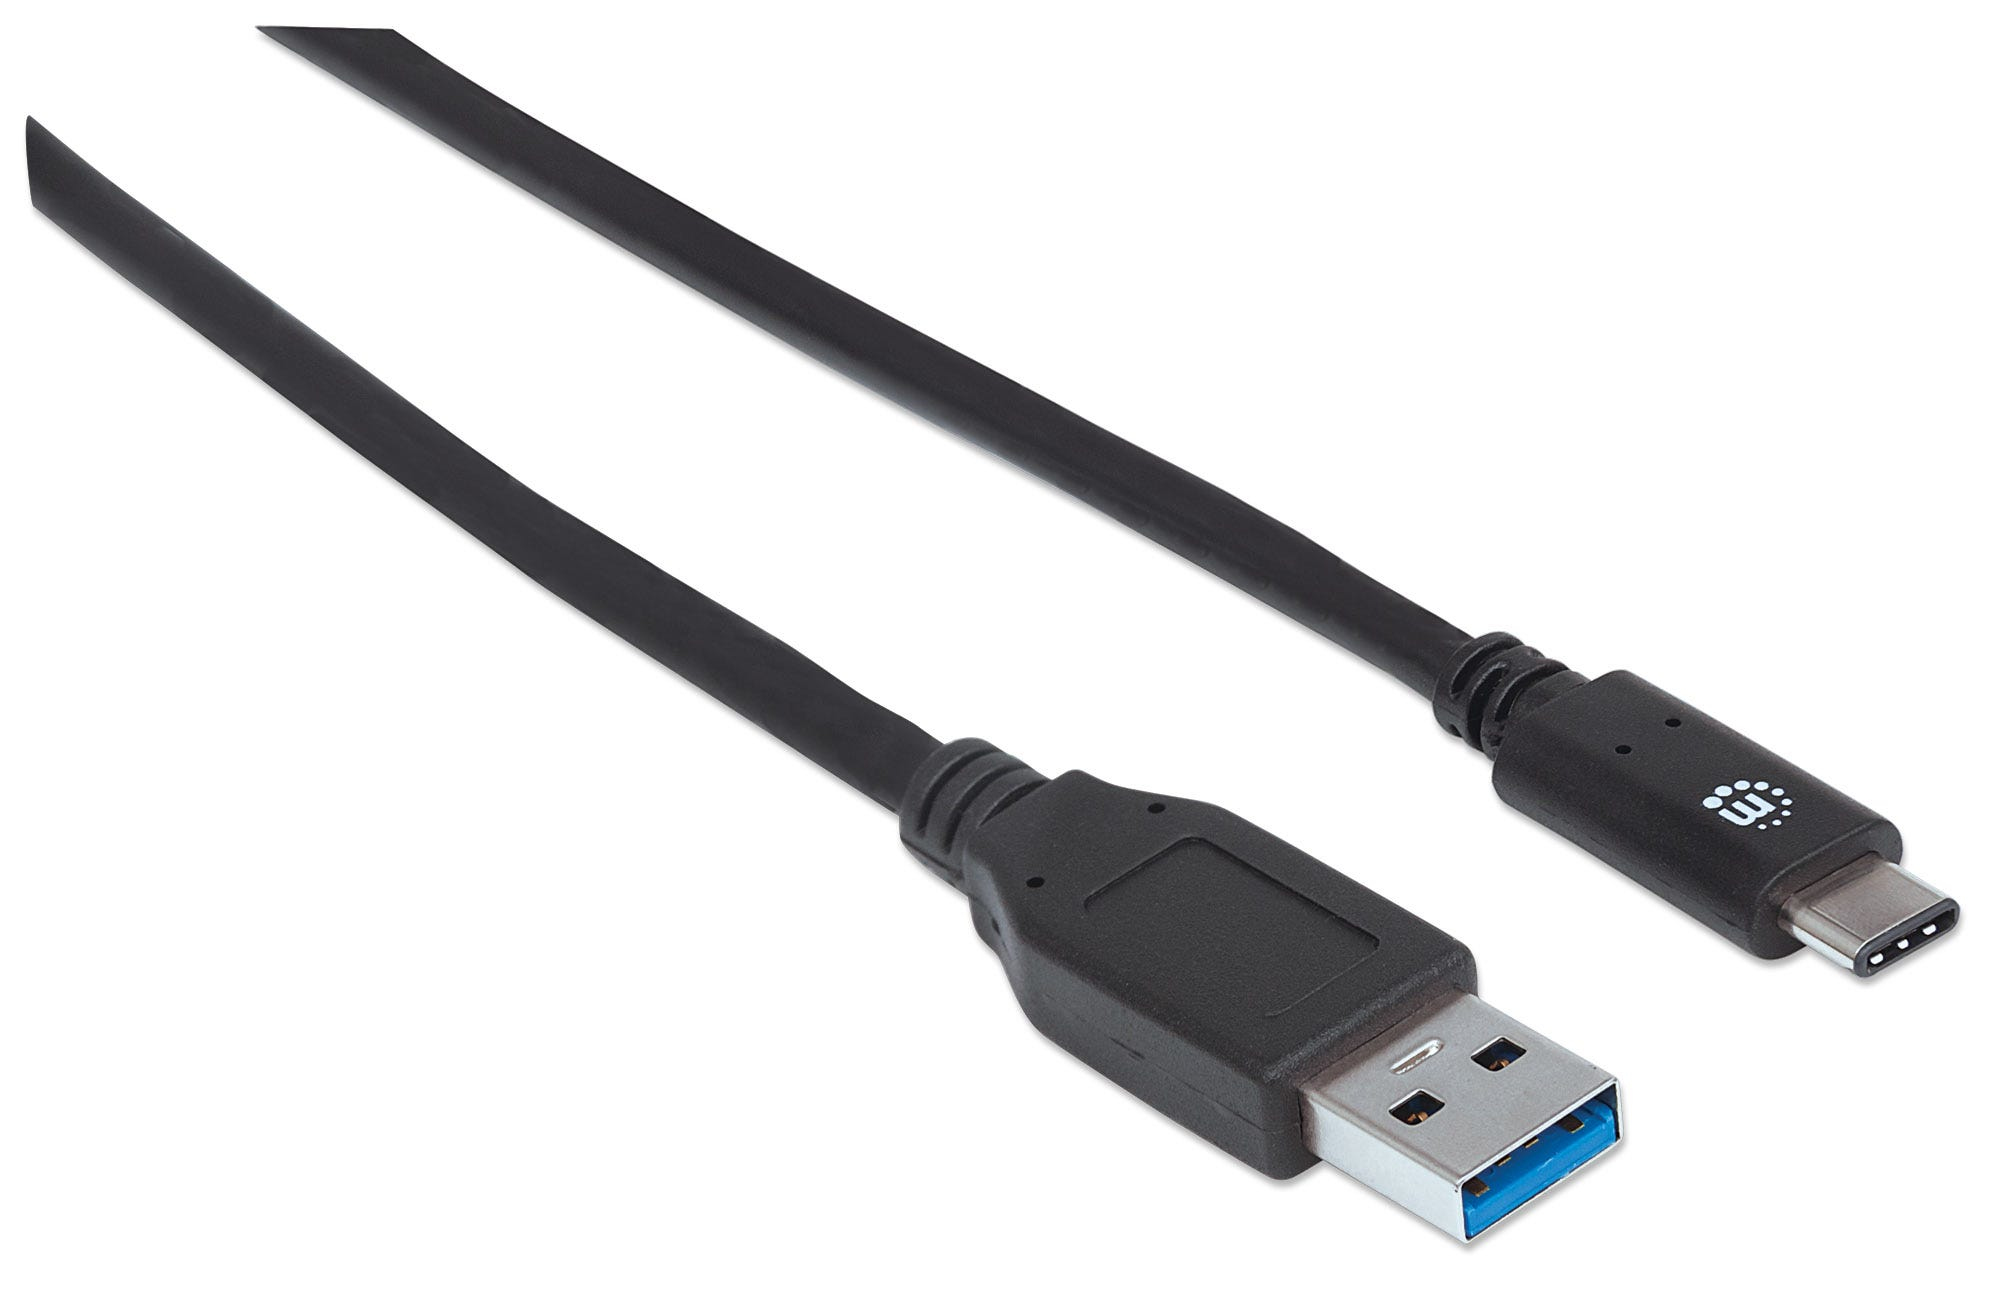 Manhattan USB-C to USB-A Cable, 1m, Male to Male, 10 Gbps (USB 3.2 Gen2 aka USB 3.1), 3A (fast charging), Black, Lifetime Warranty, Polybag